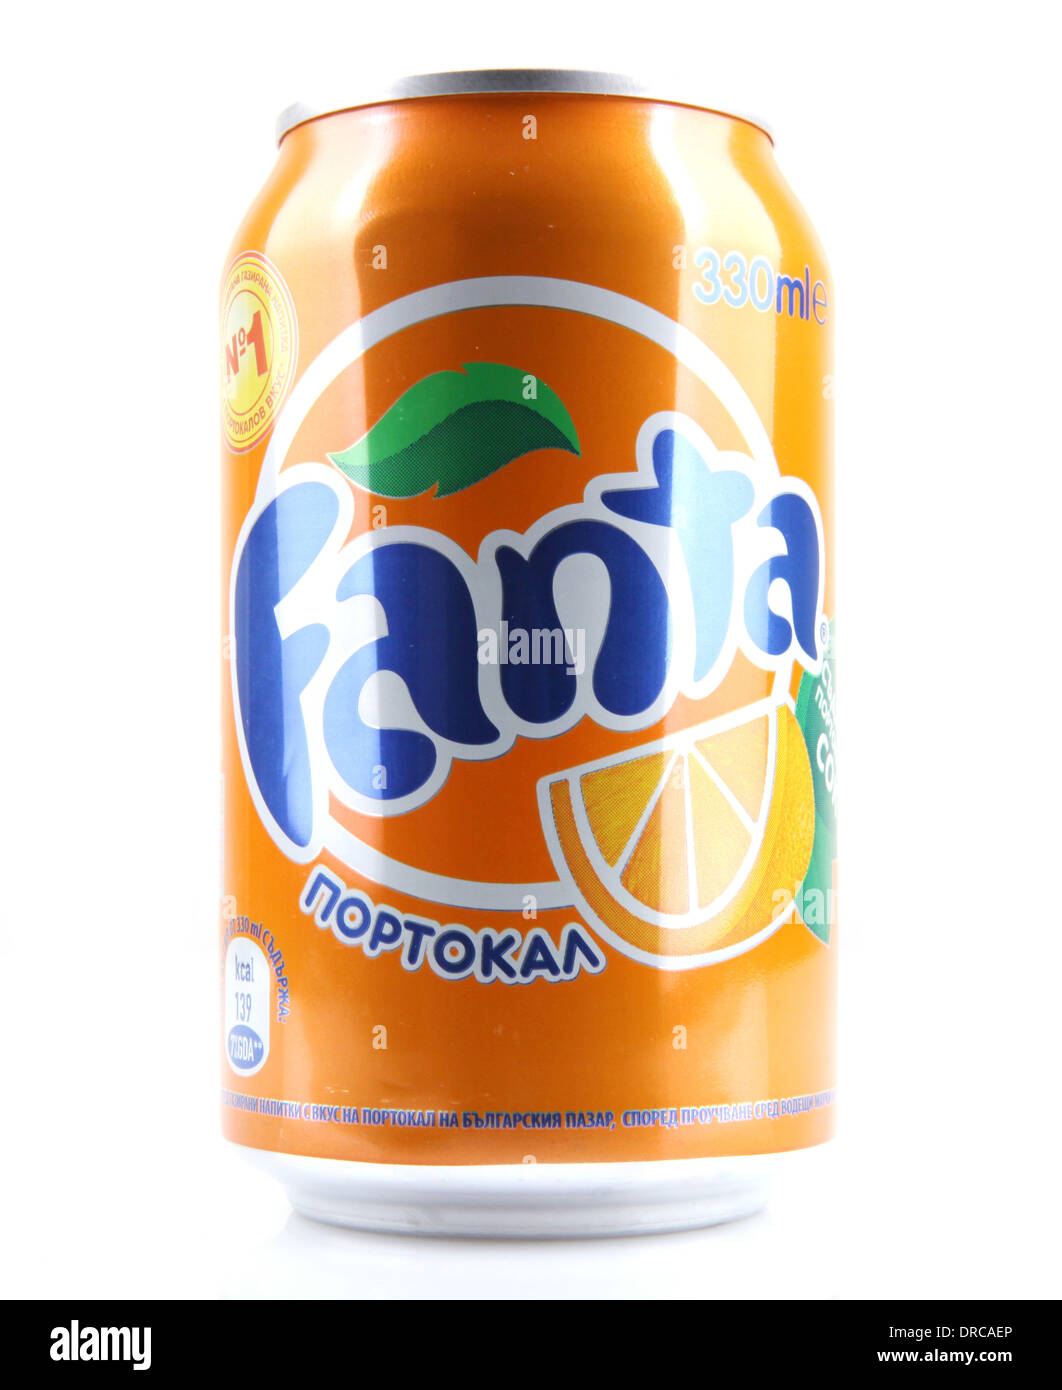 AYTOS, BULGARIA - JANUARY 23, 2014: Fanta bottle can isolated on white background. Fanta is a carbonated soft drink sold in Stock Photo